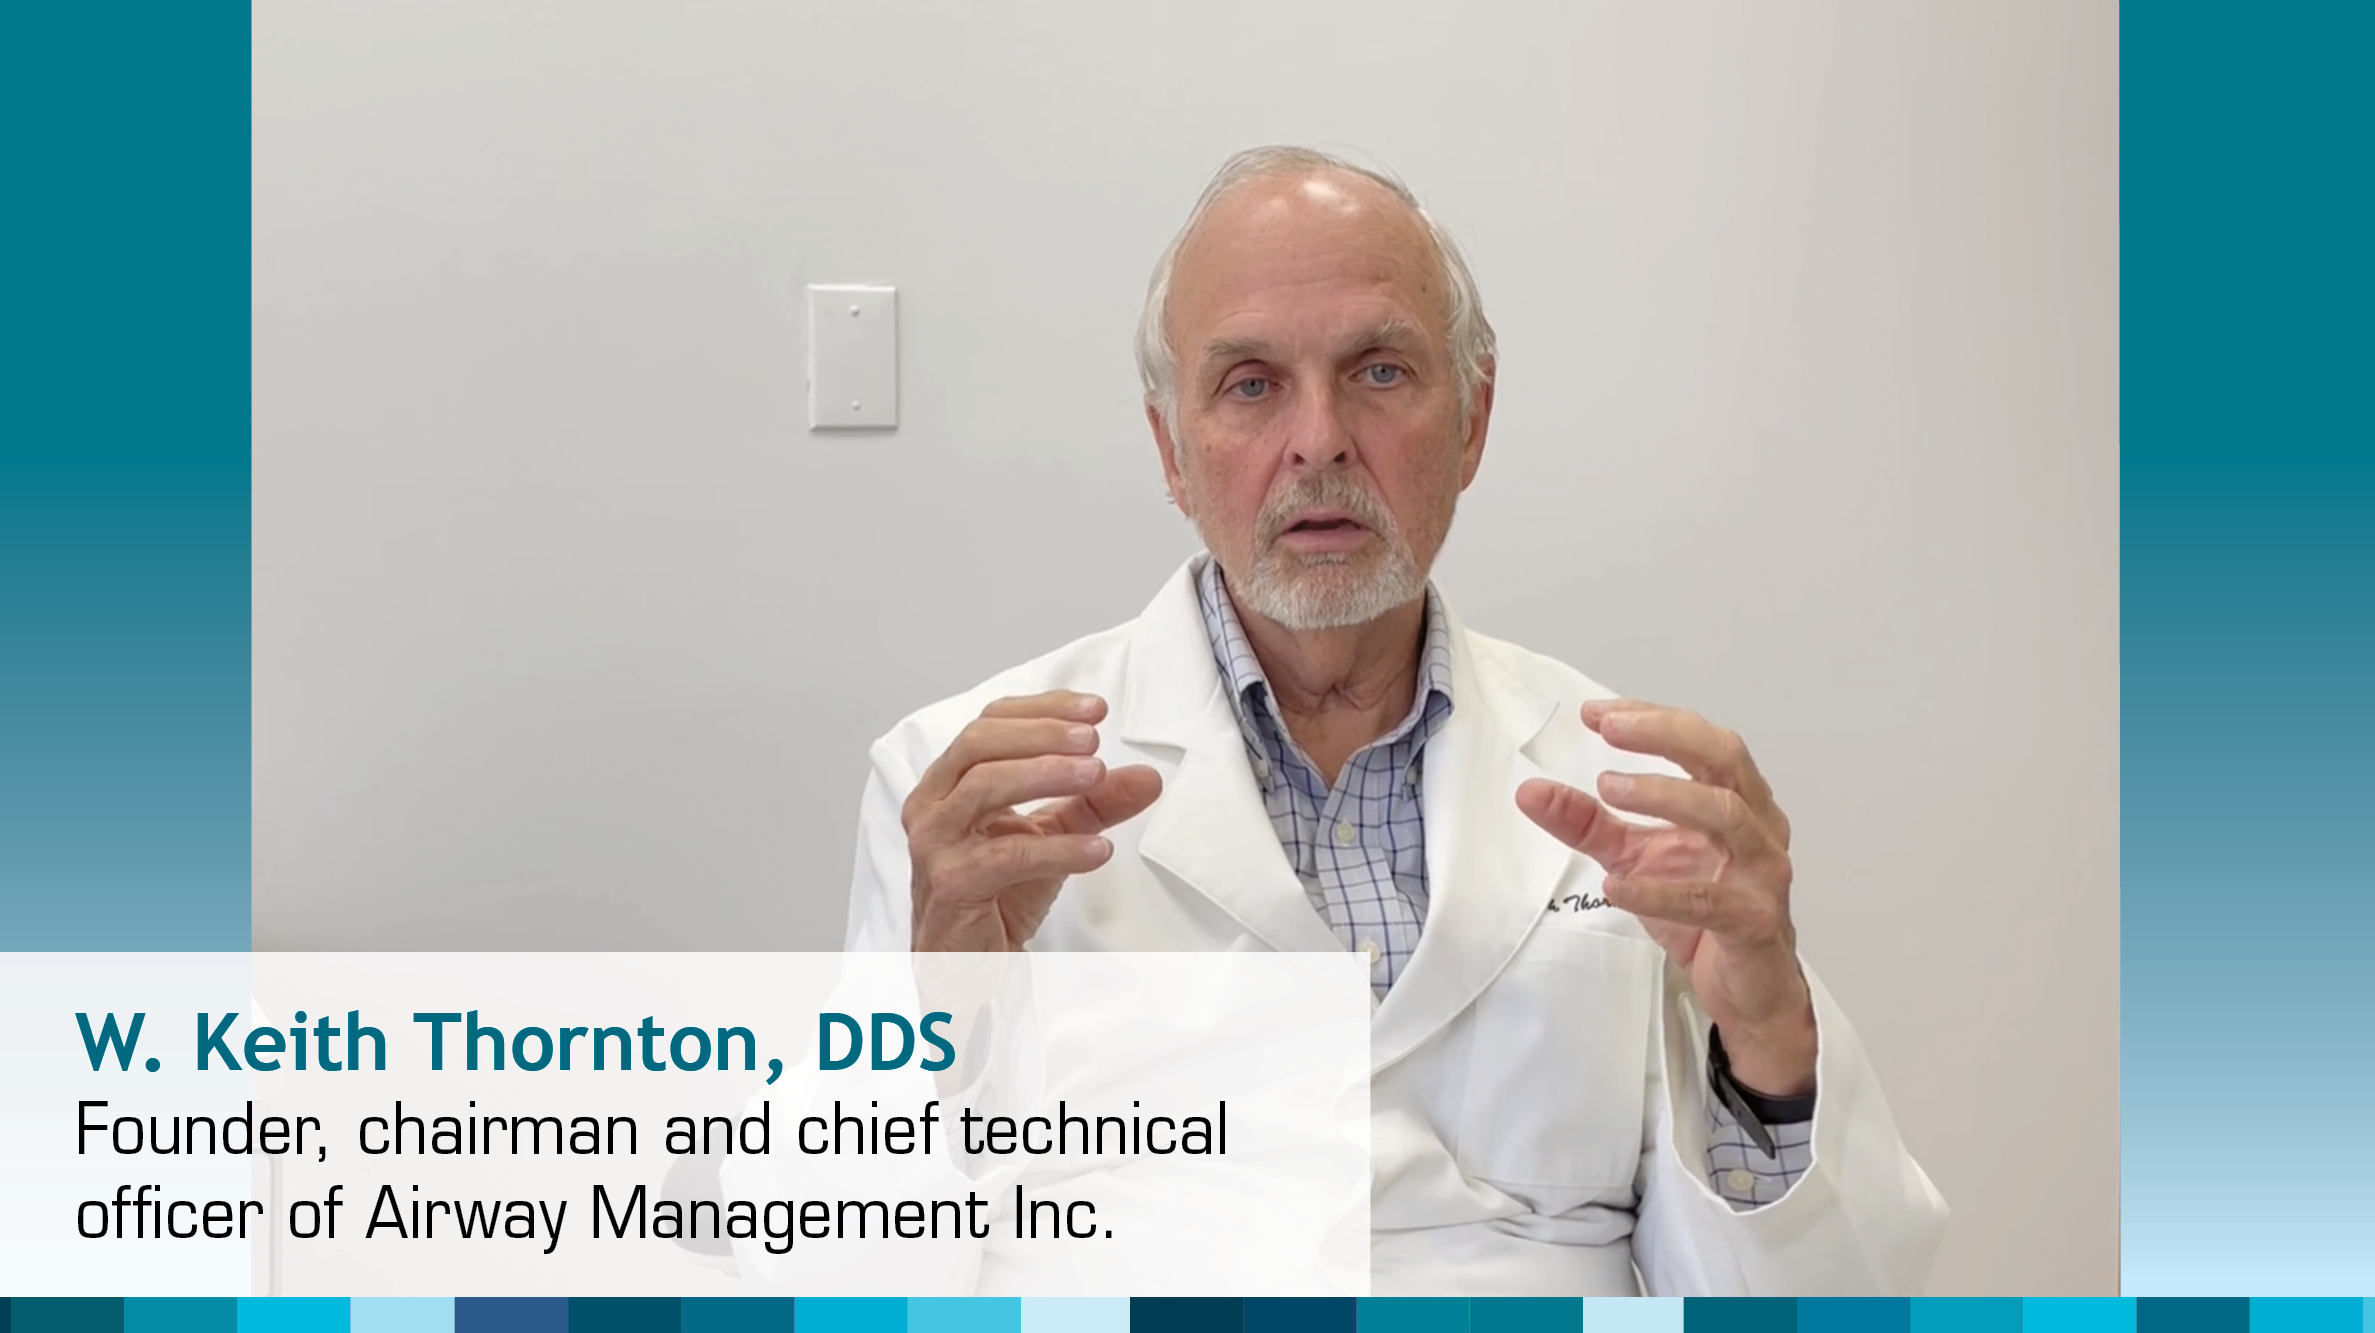 W. Keith Thornton, DDS video overlay